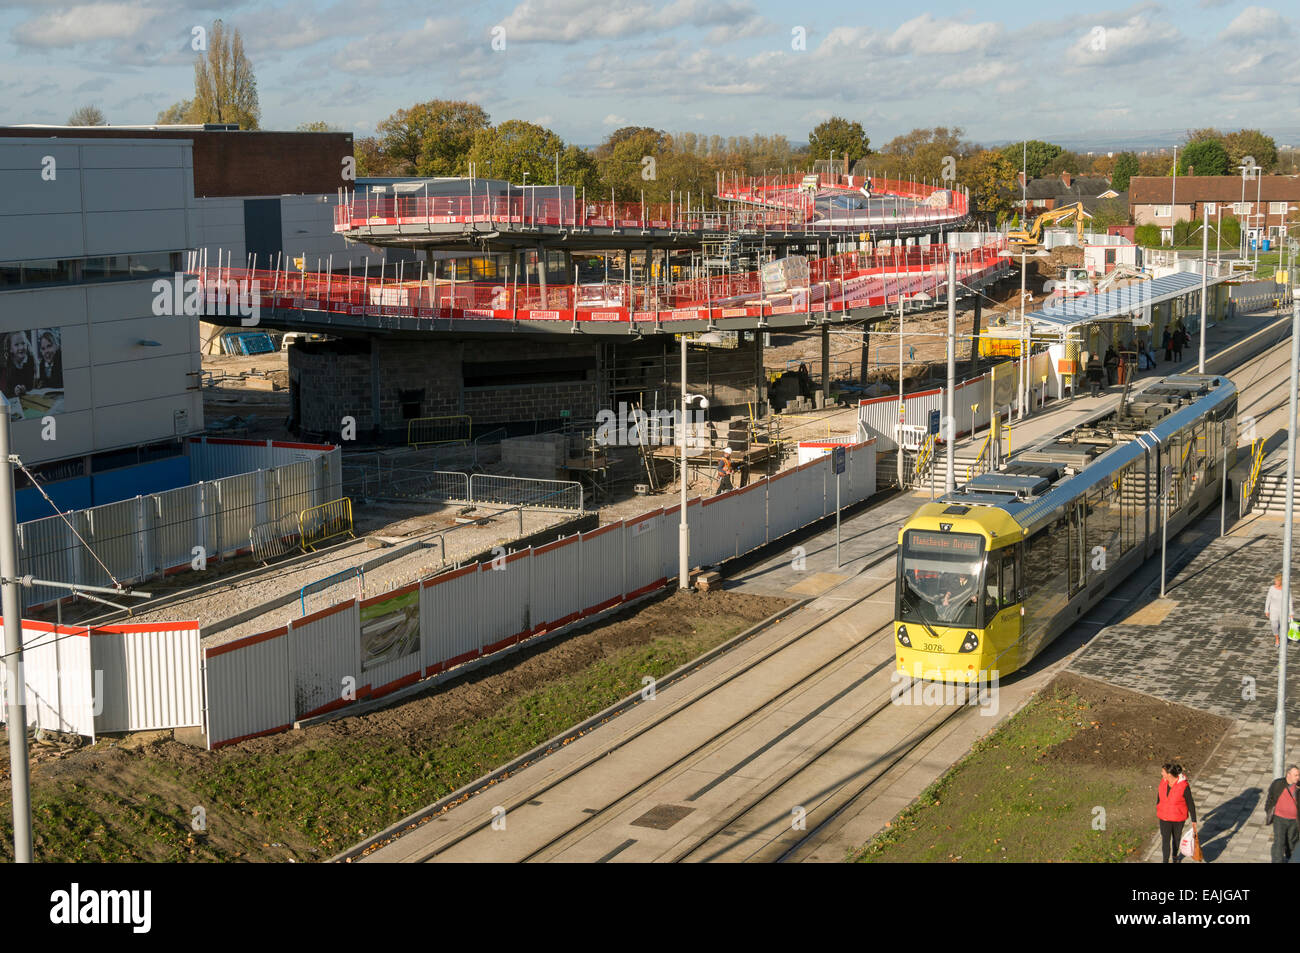 Metrolink tram at the Wythenshawe stop, Airport Line, Manchester, England, UK with new transport interchange under construction. Stock Photo